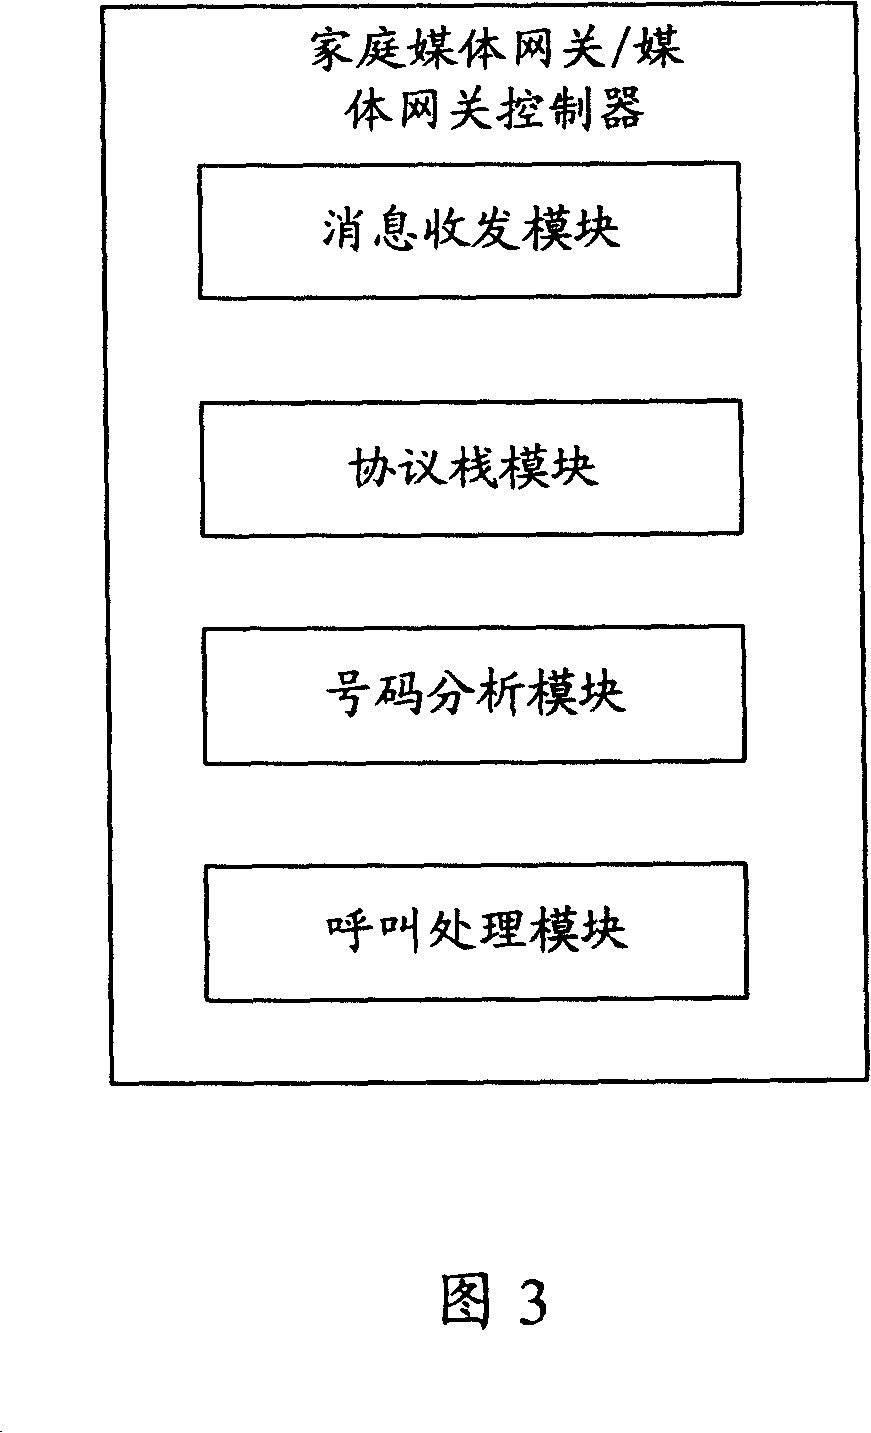 Communication equipment and method for implementing one number for multi-phone